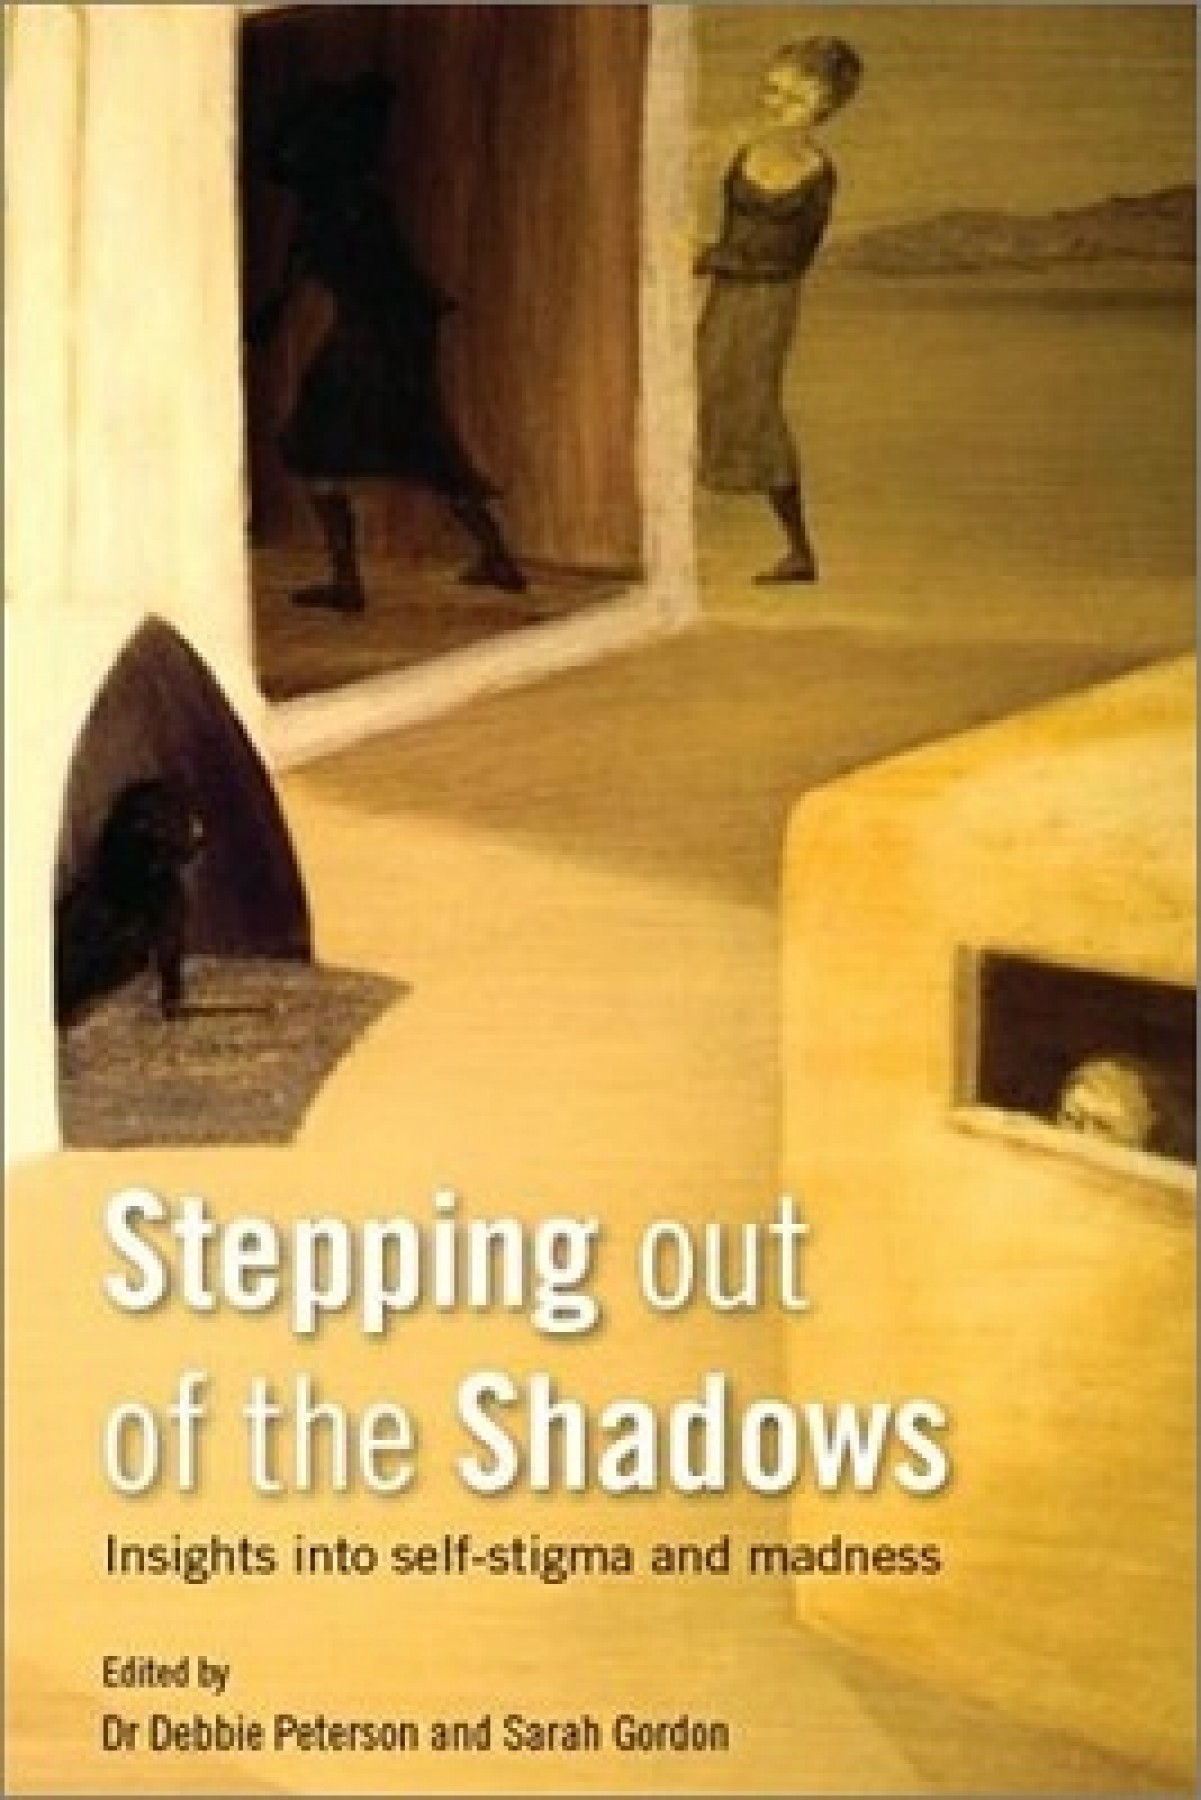 Stepping out of the Shadows: Insights into self-stigma and madness